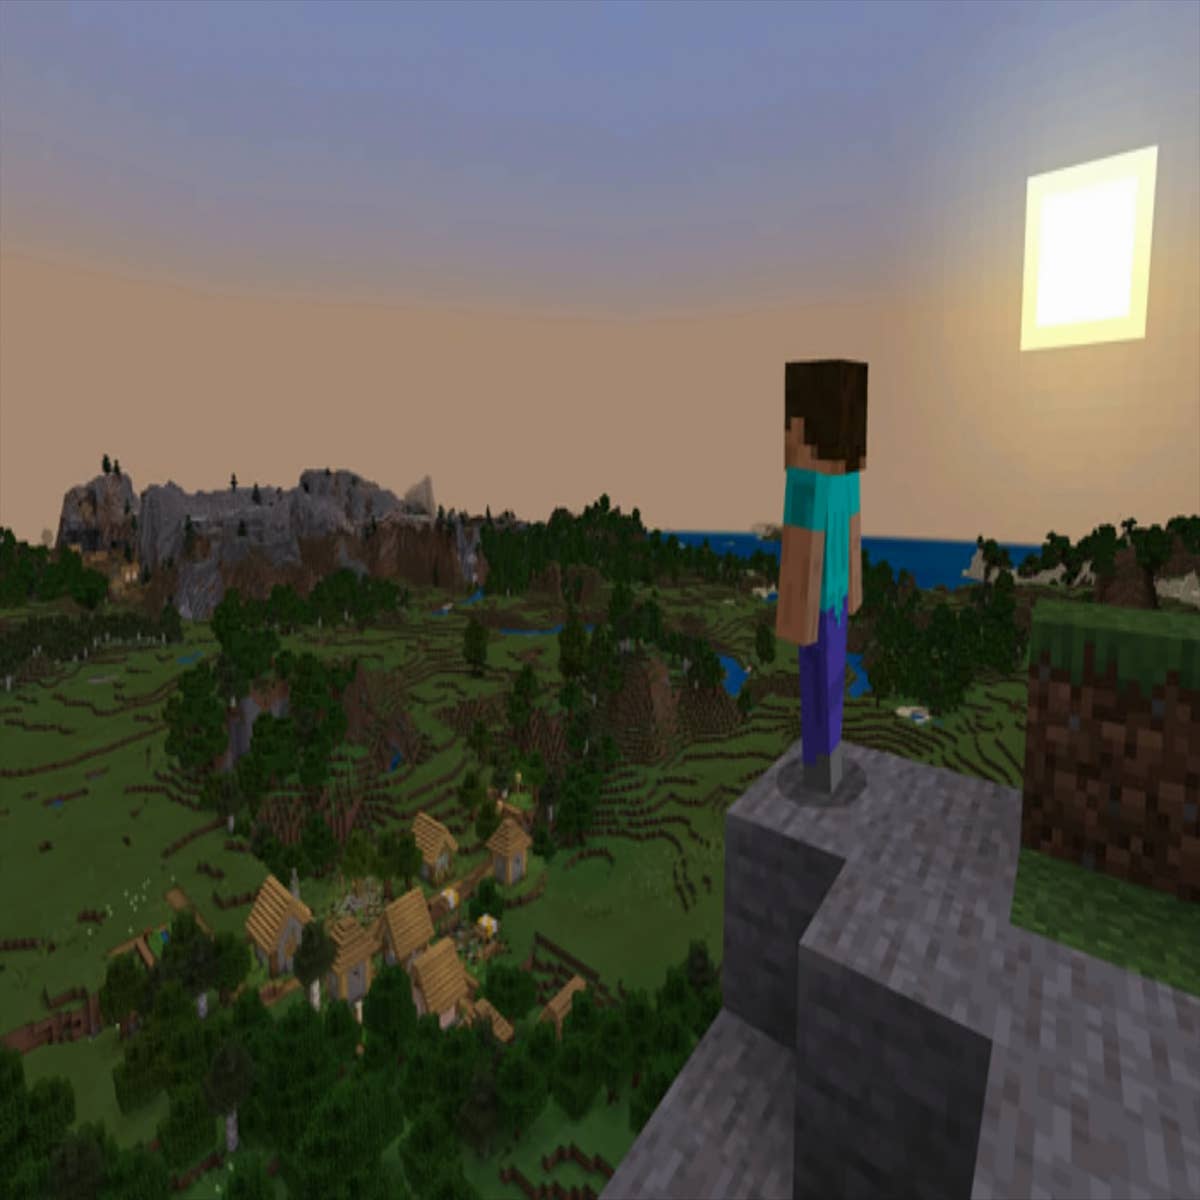 How to download Minecraft Java Edition: Step-by-step guide